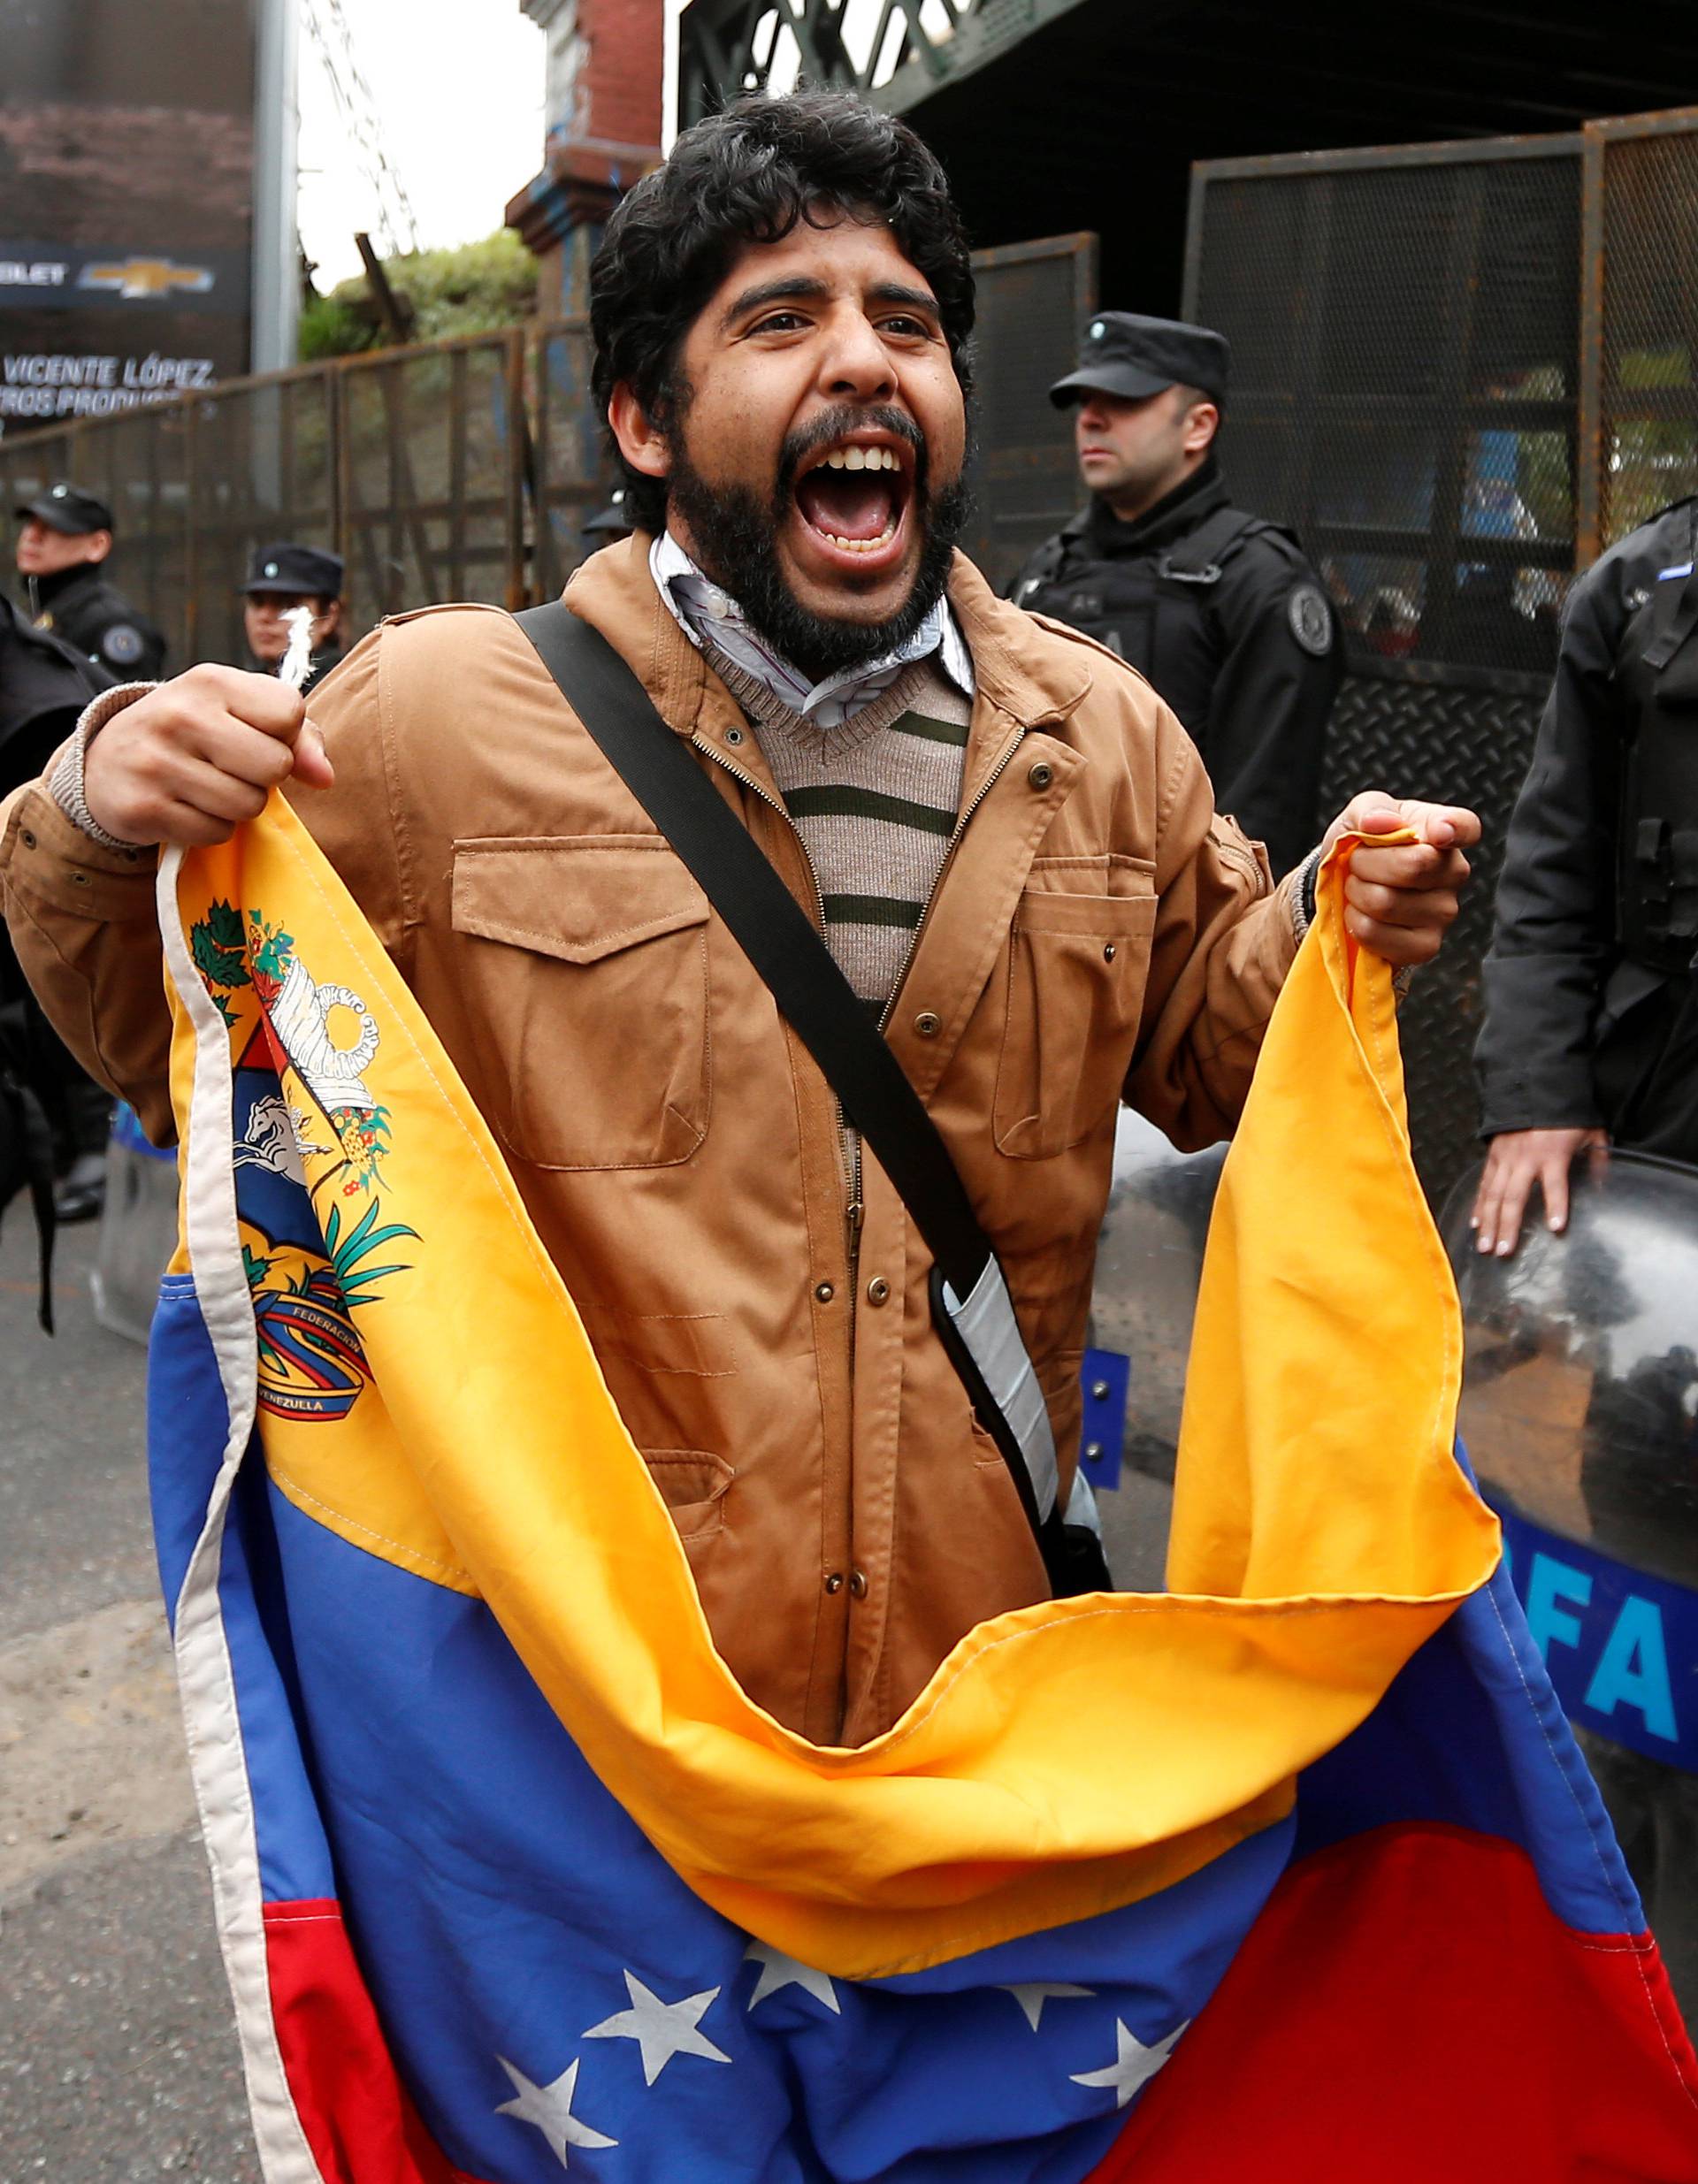 A Venezuelan resident takes part in a protest near Venezuela's Embassy in Argentina in support of the rally demanding a referendum to remove Venezuela's President Nicolas Maduro, in Buenos Aires